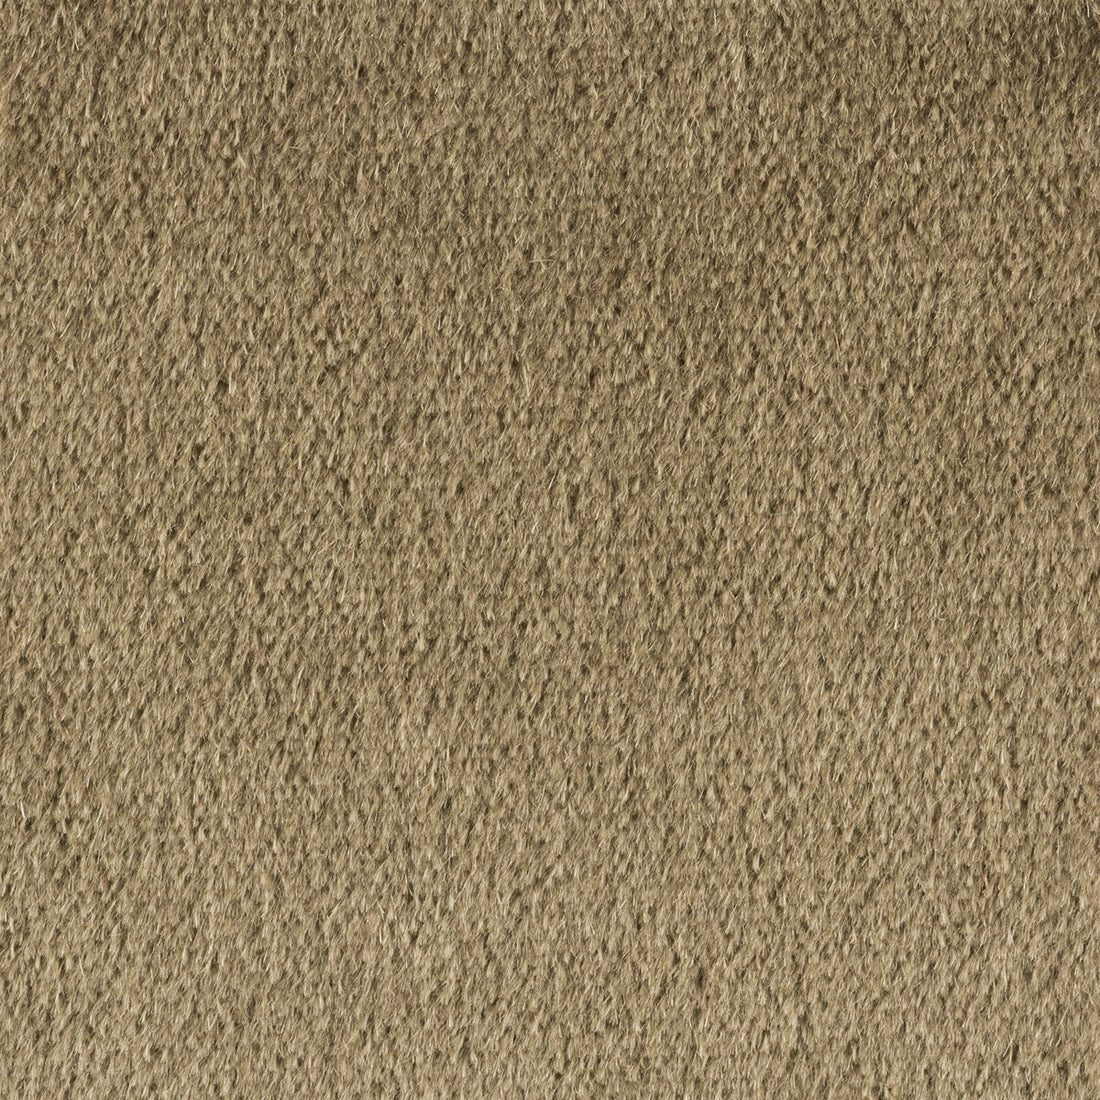 Plazzo Mohair fabric in lead color - pattern 34259.881.0 - by Kravet Couture